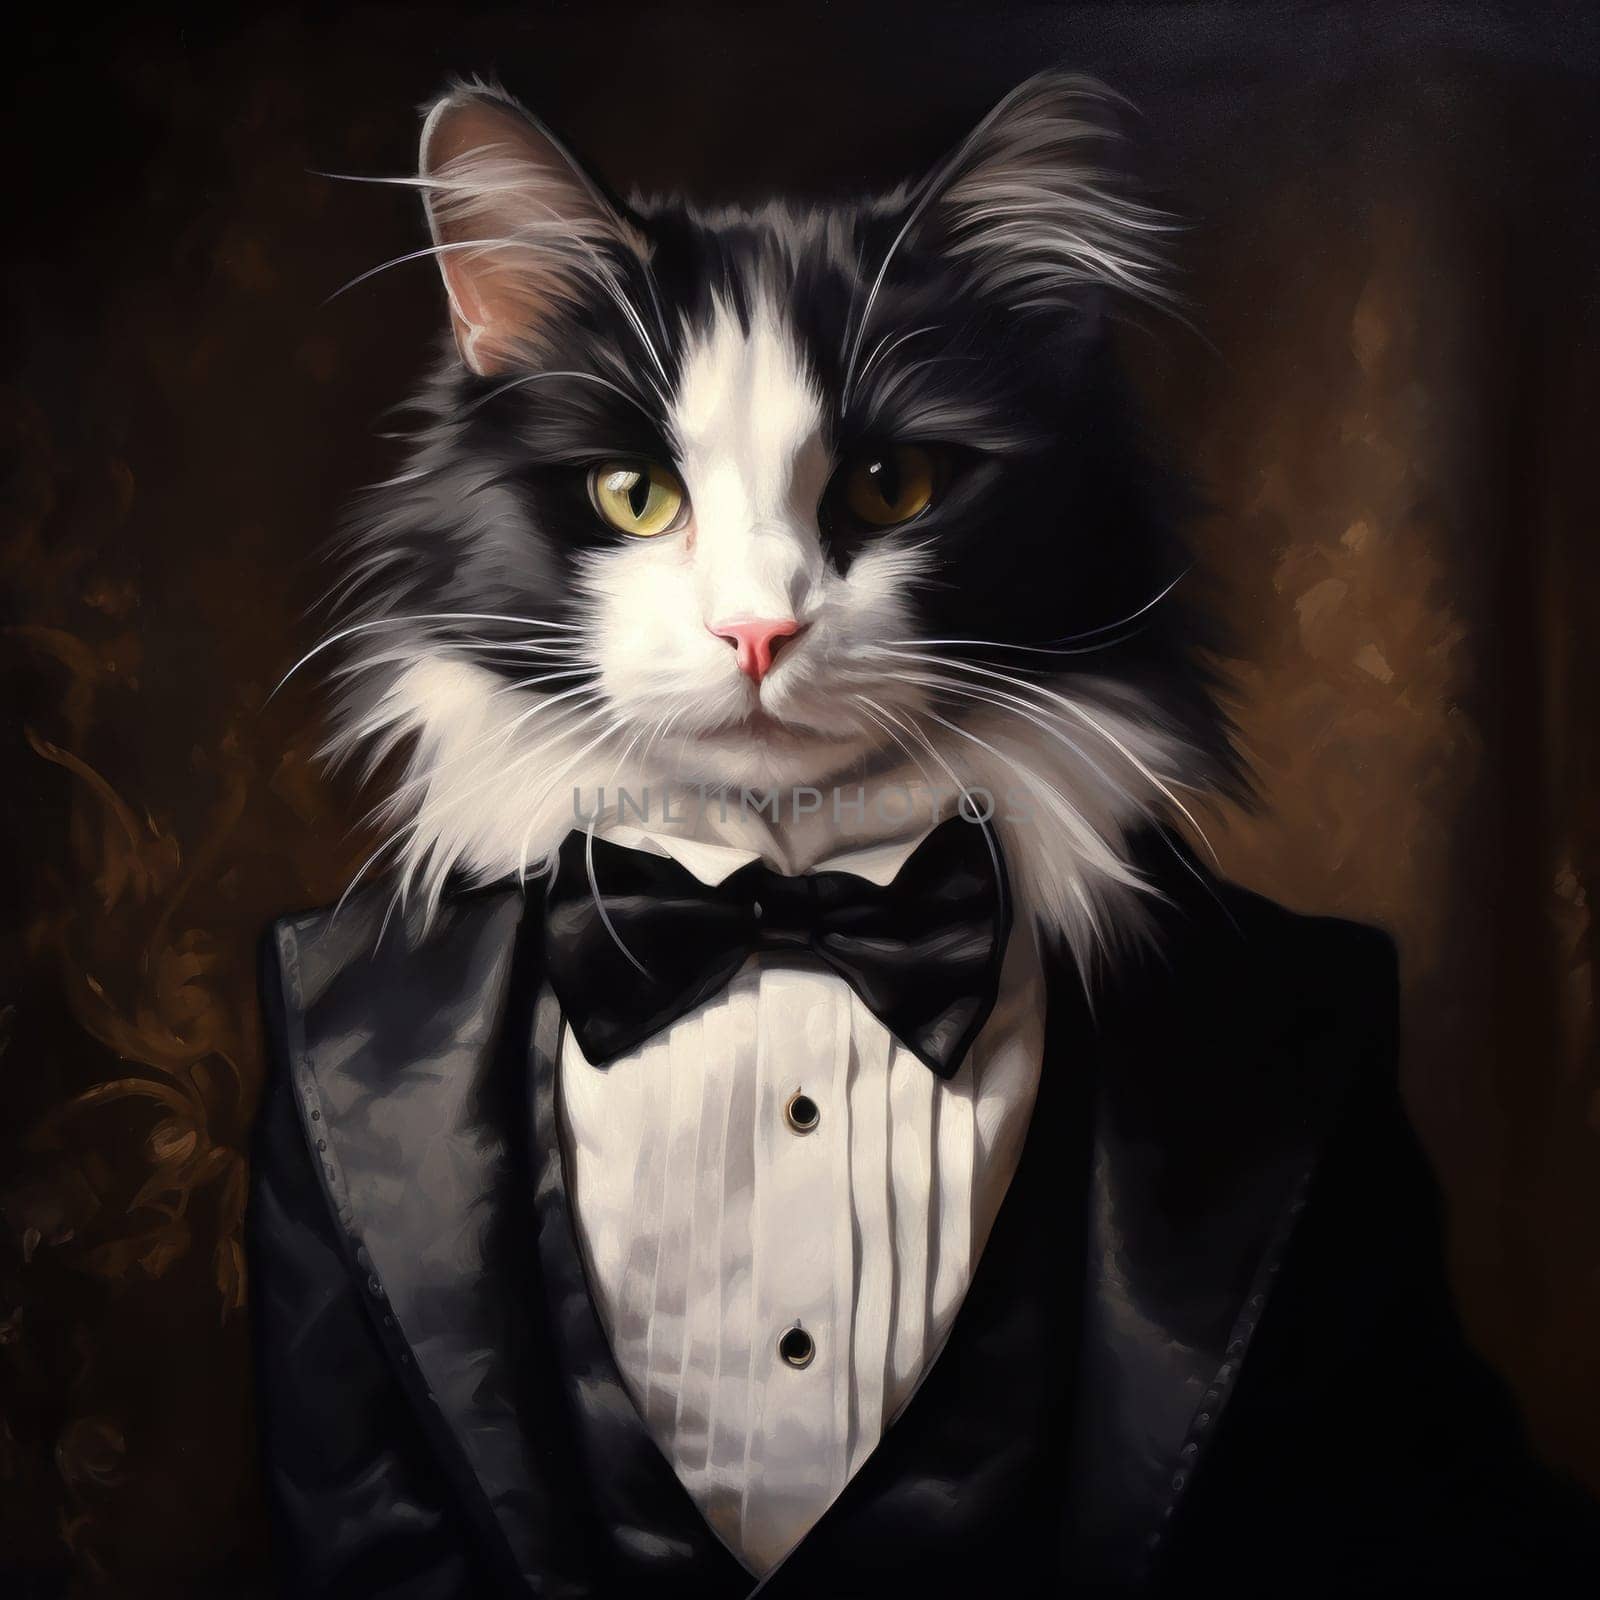 A black and white cat wearing a tuxedo, AI by starush